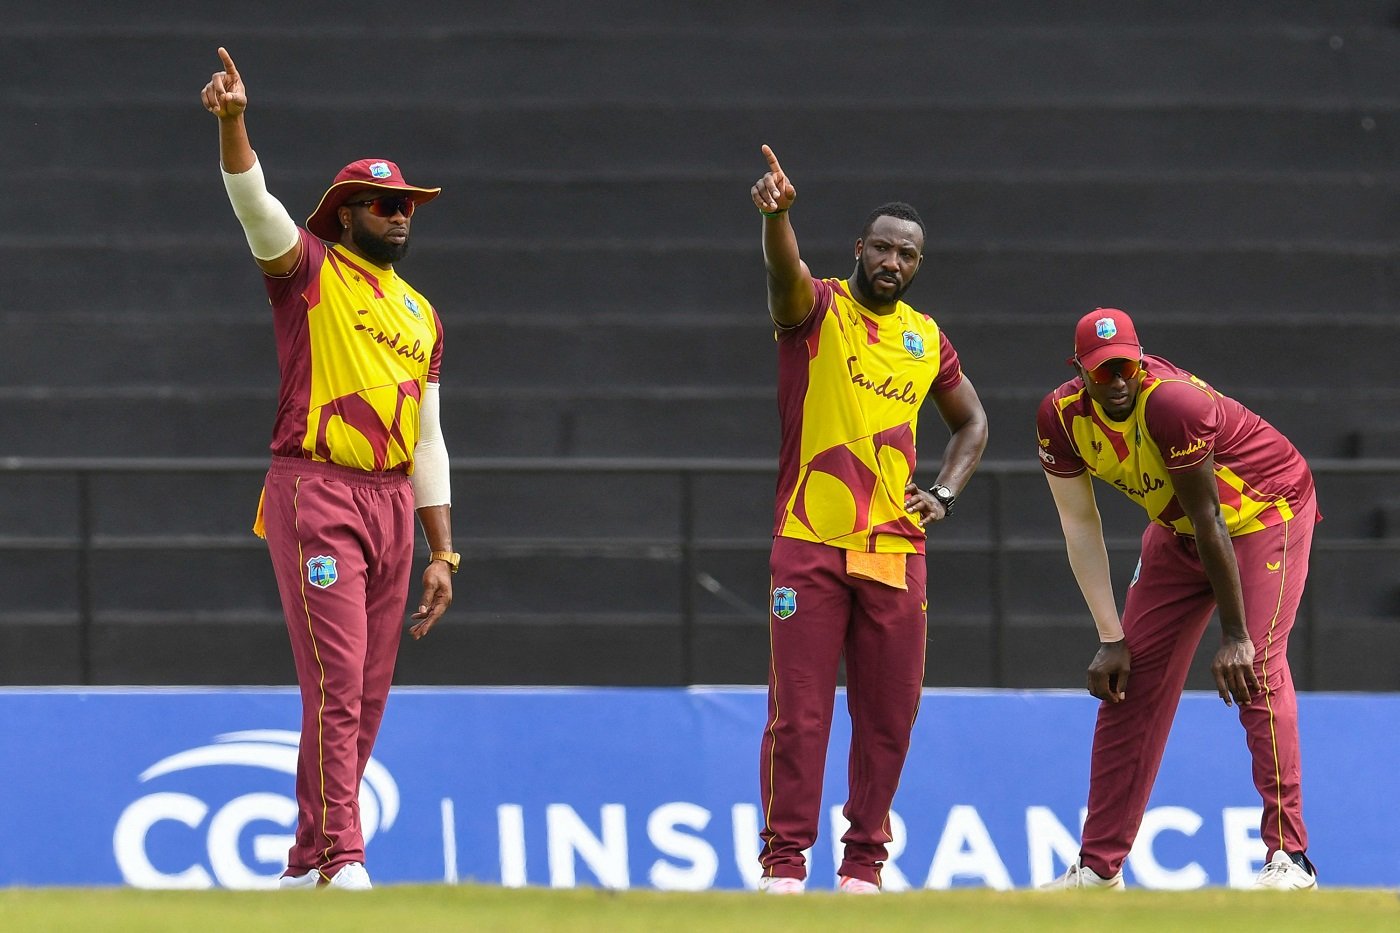 West Indies vs South Africa 2021, 5th T20I- Match Preview